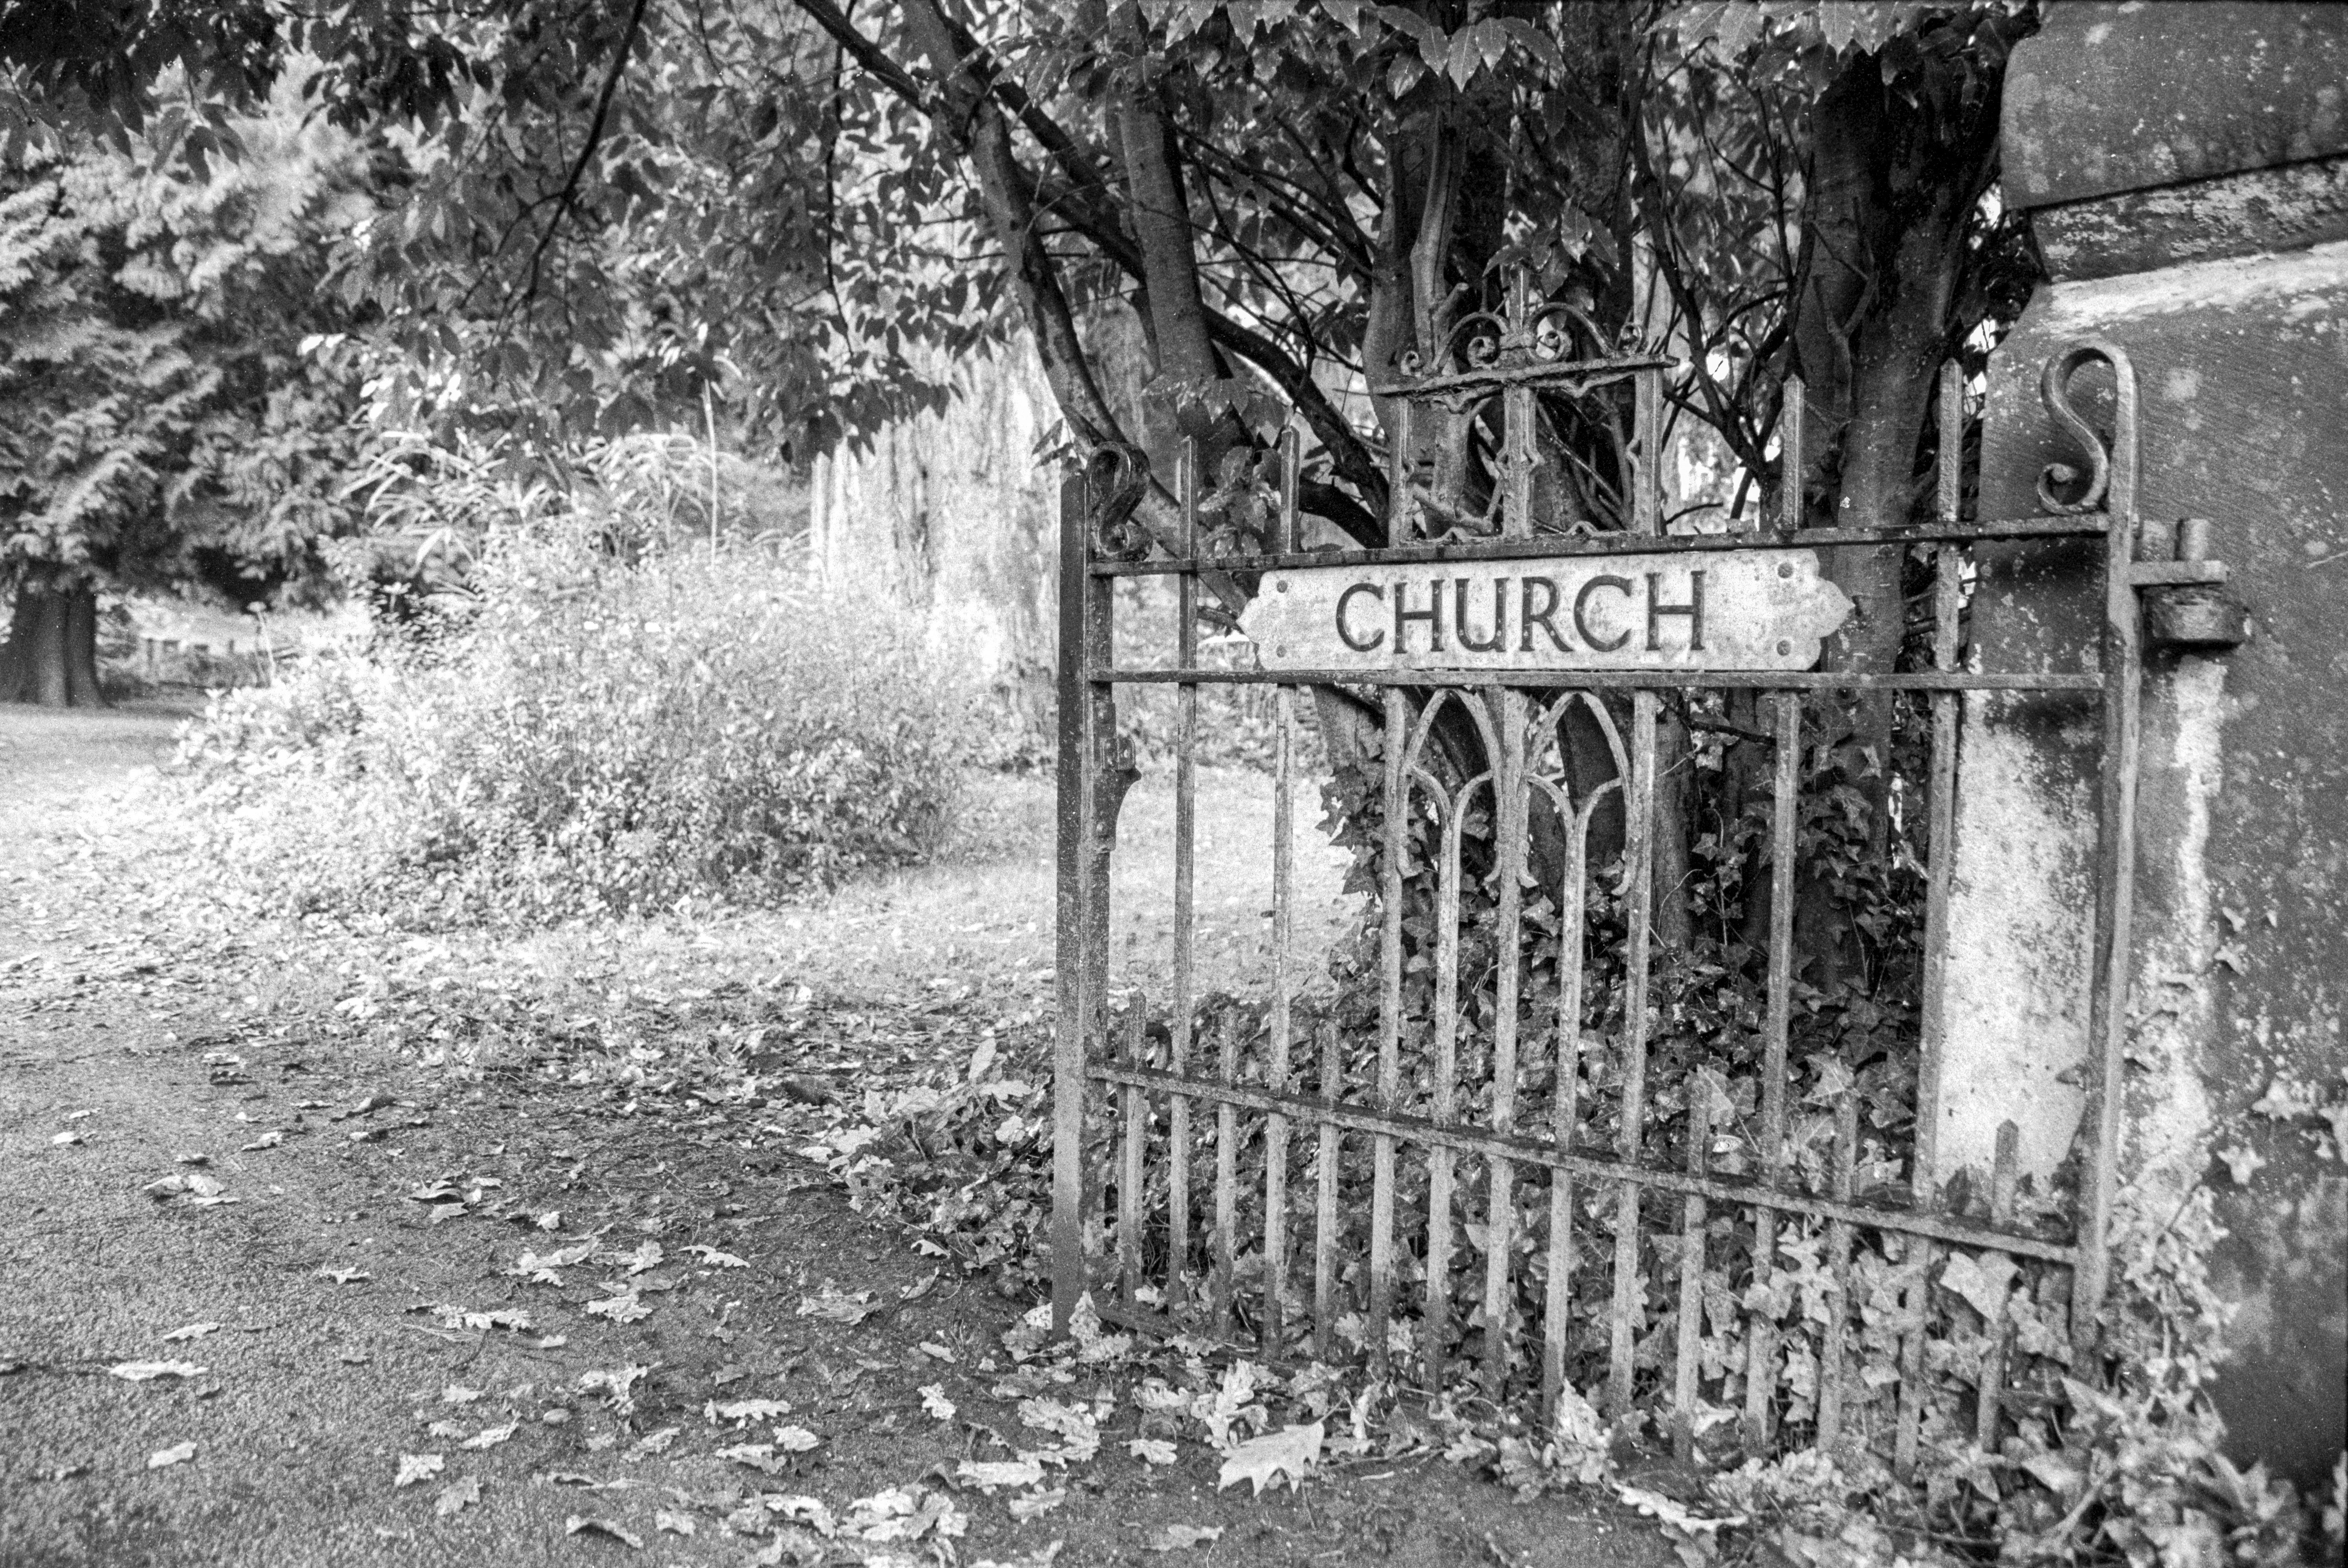 A fall morning yielded lots of leaves on the ground to accentuate a lovely wrought iron fence for the church in rural Wales. Have loved this image since I shot it in 1998. Shot on 35mm film, Canon A2E